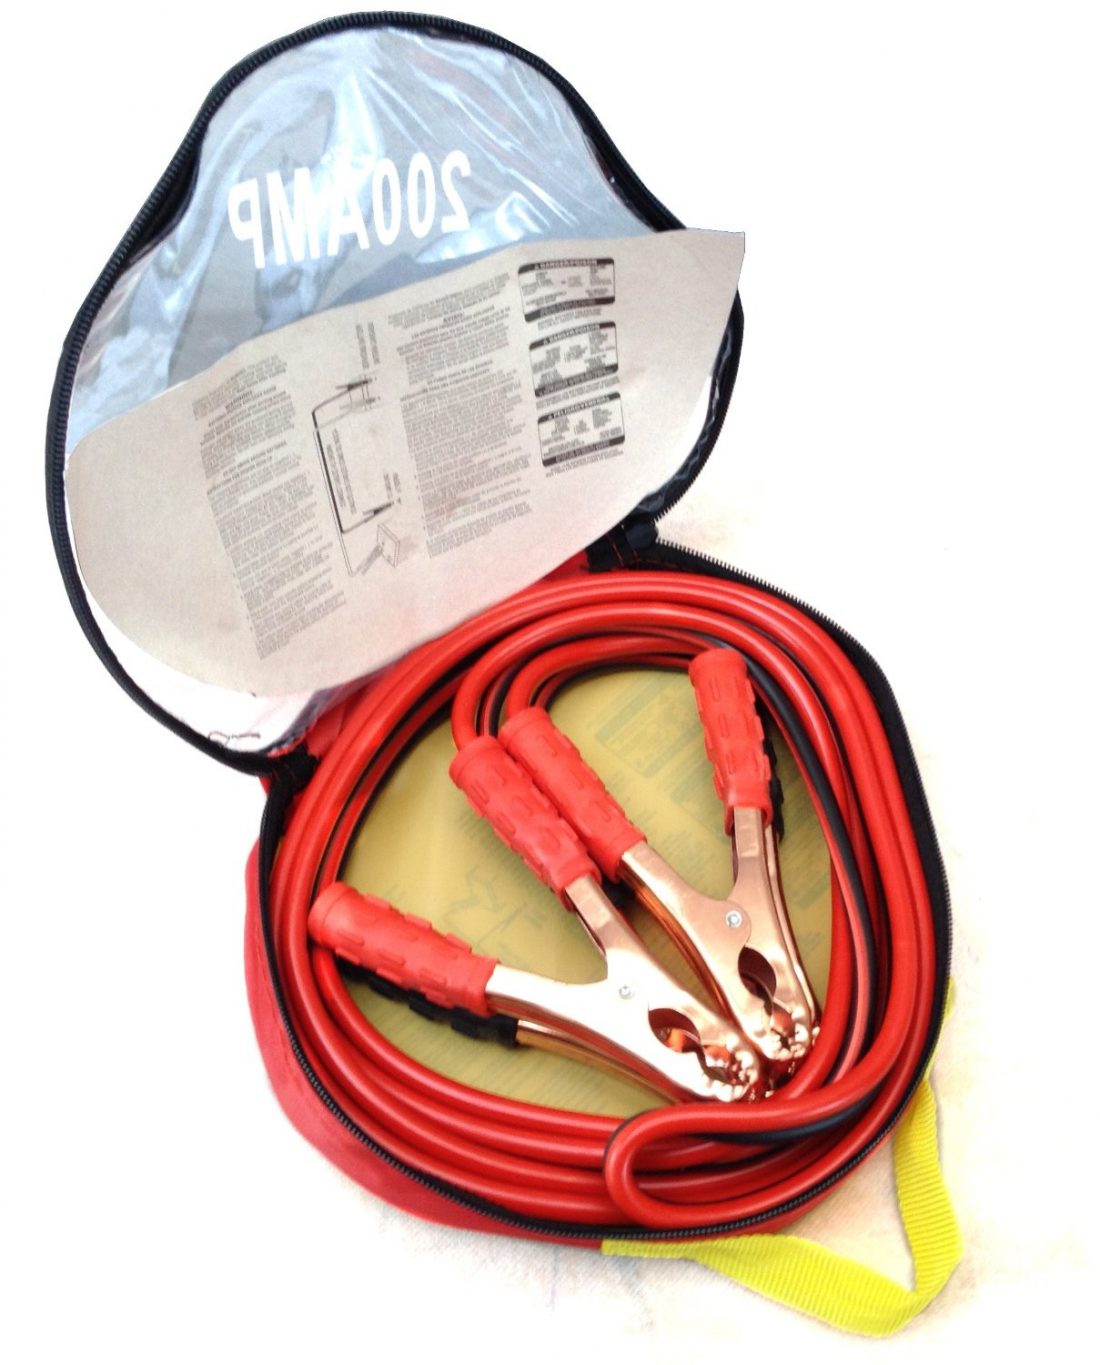 Jumper Cables No Tangle Booster 12 Foot Long, 10 Gauge, 200 Amp, With Free Travel Carrying Case